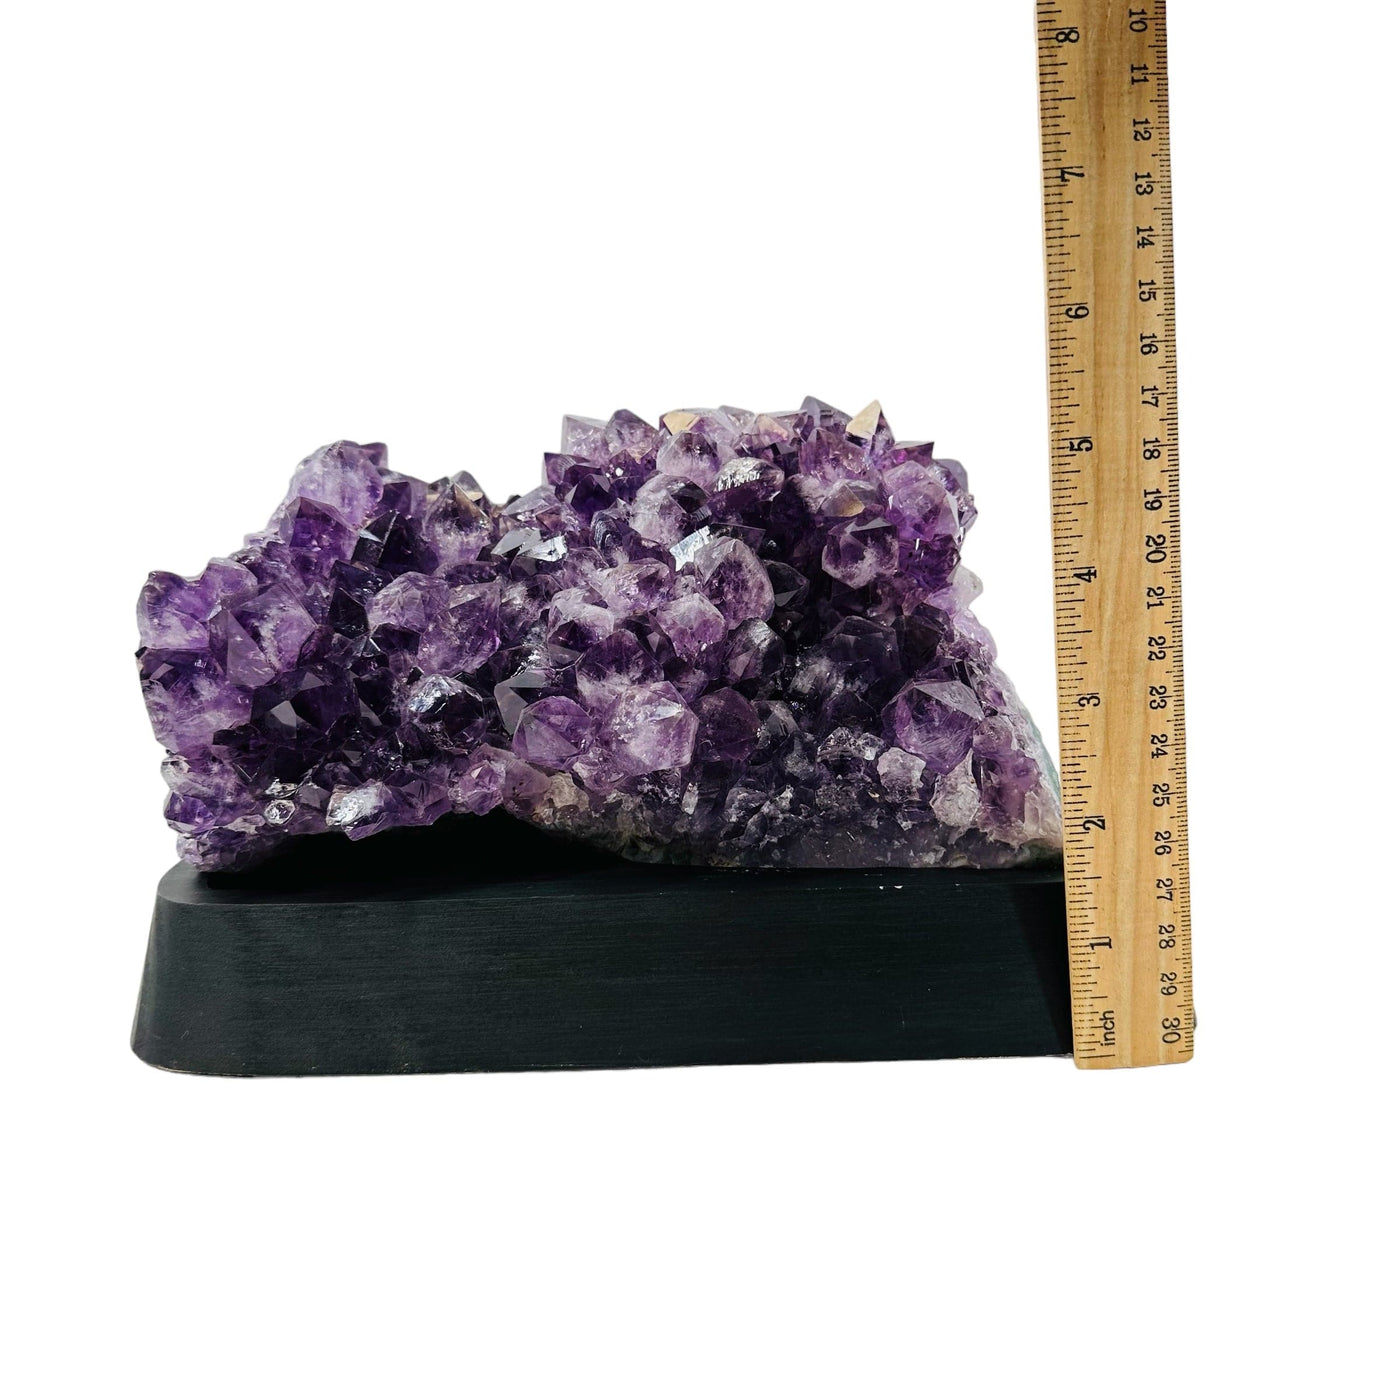 amethyst cluster next to a ruler for size reference 